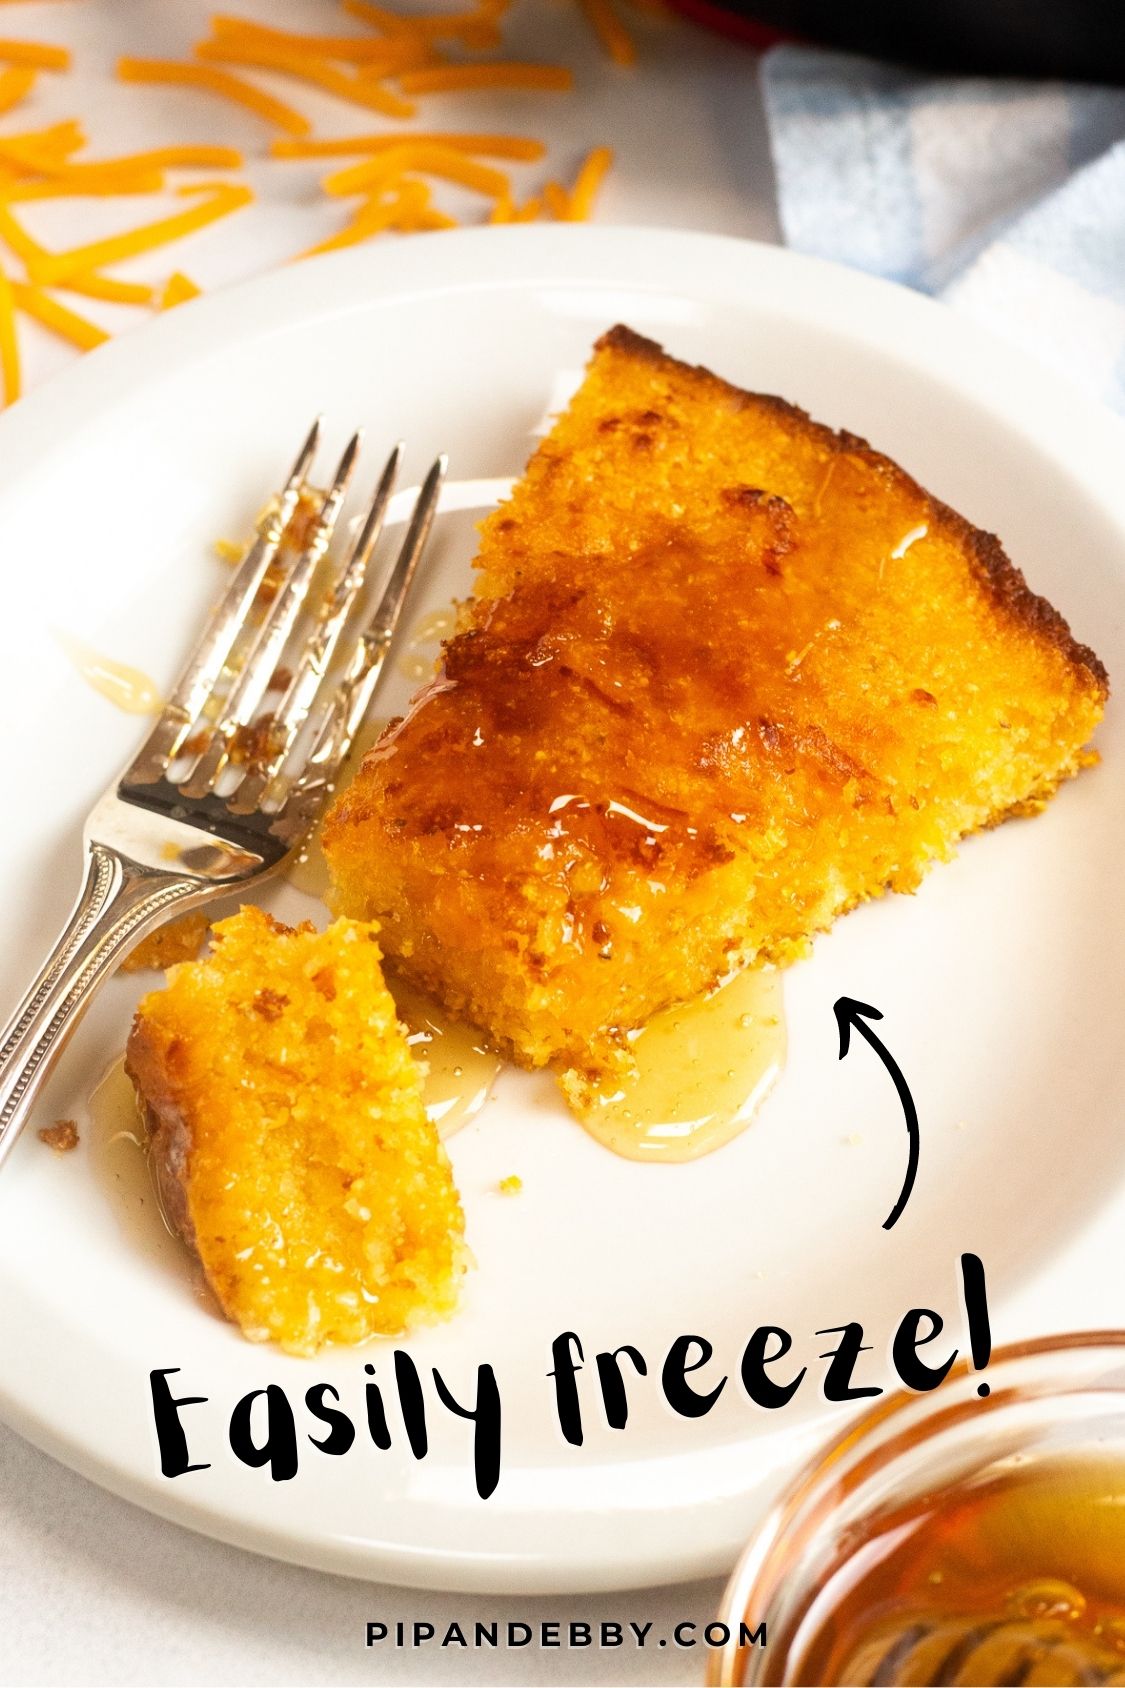 Cornbread on a plate with text overlay reading, "Easily freeze!"